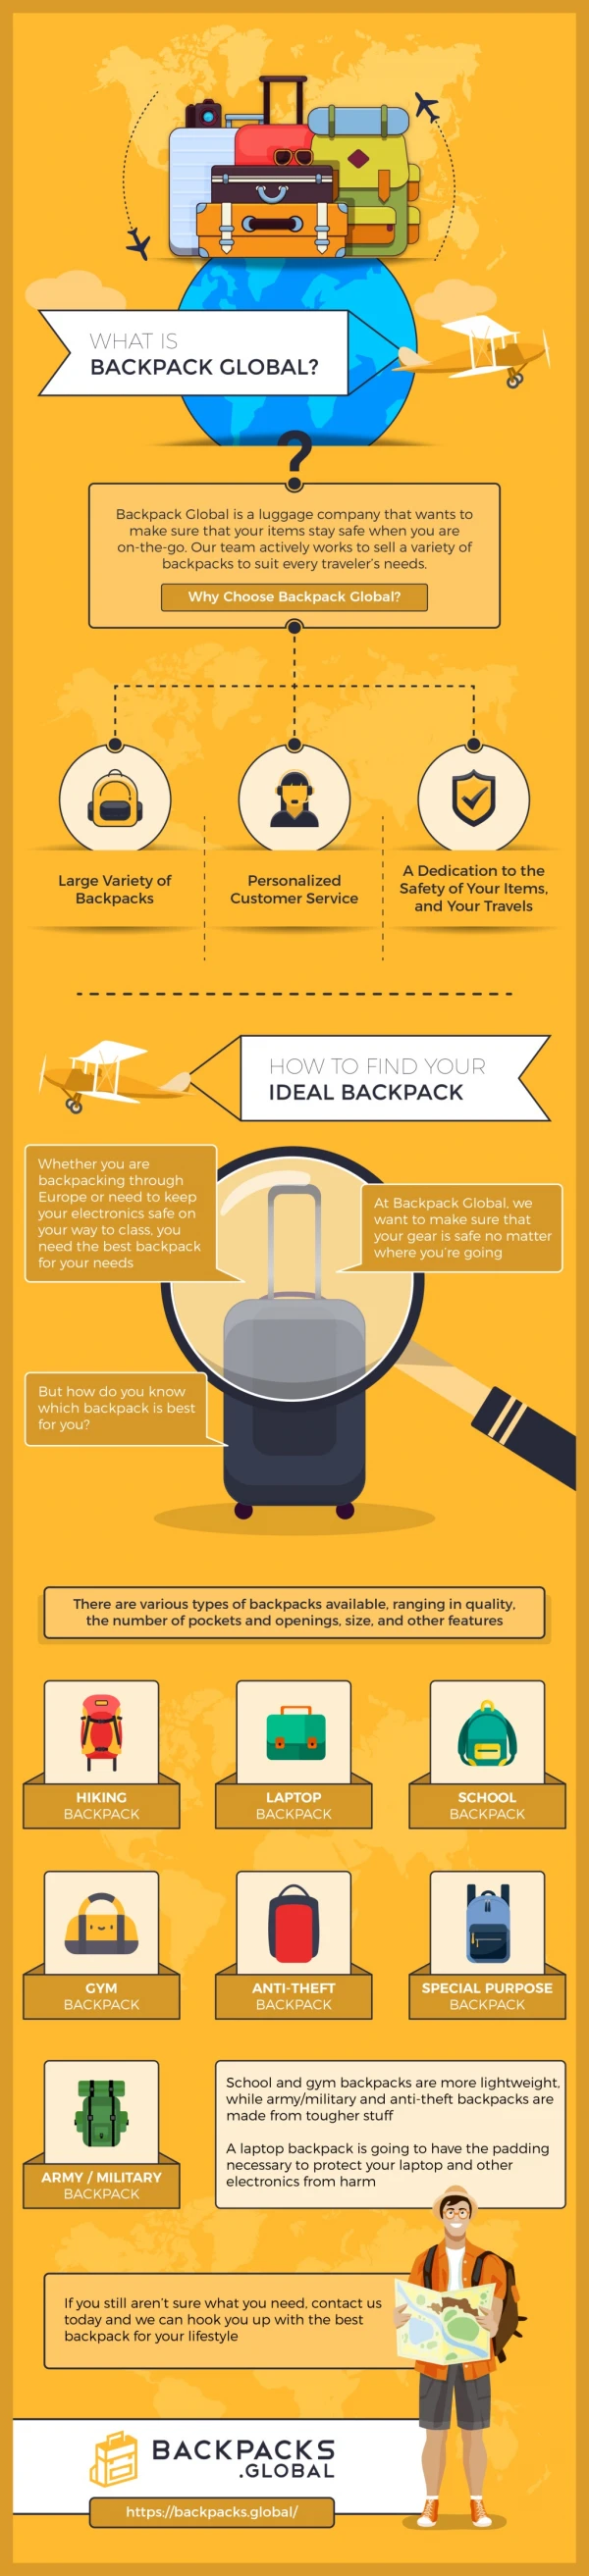 What is Backpack Global?